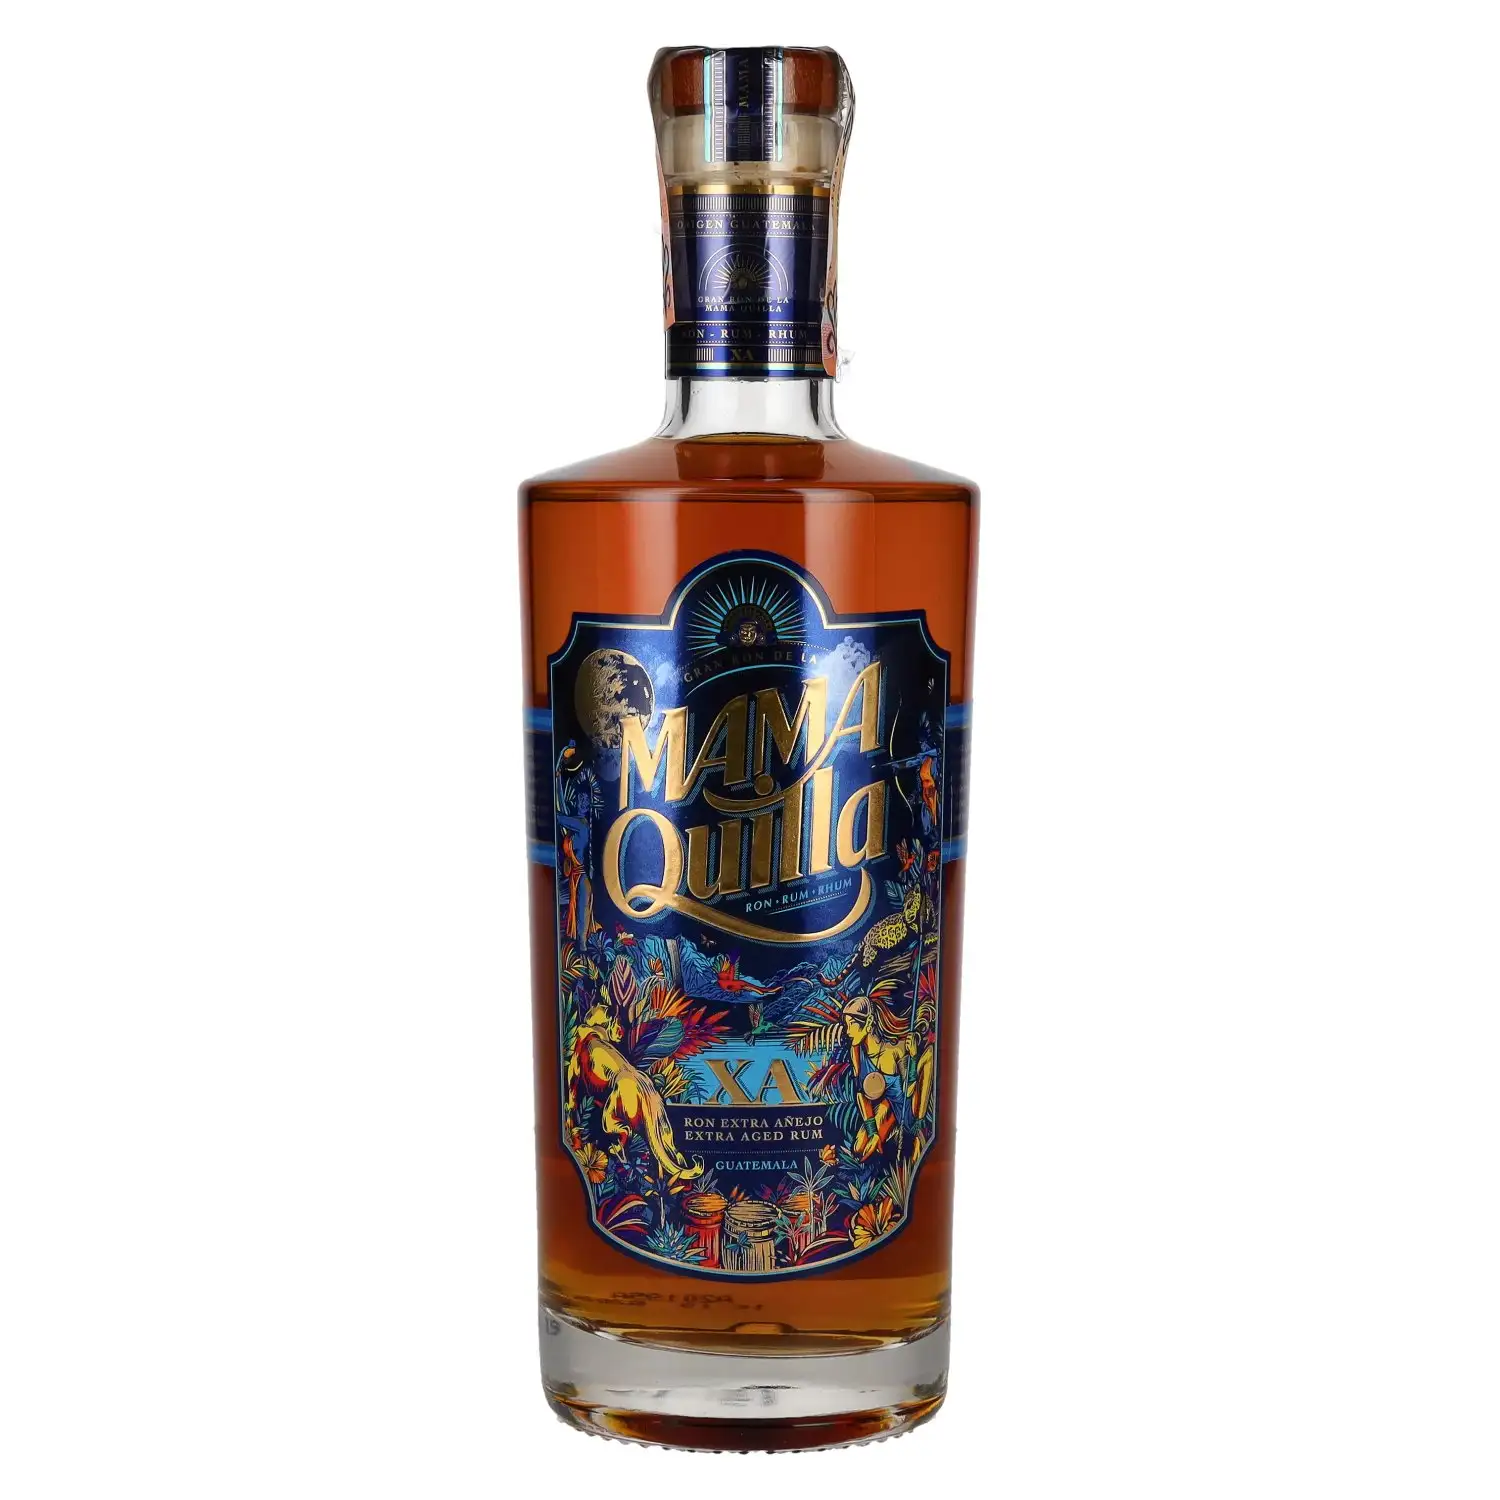 Image of the front of the bottle of the rum Mama Quilla